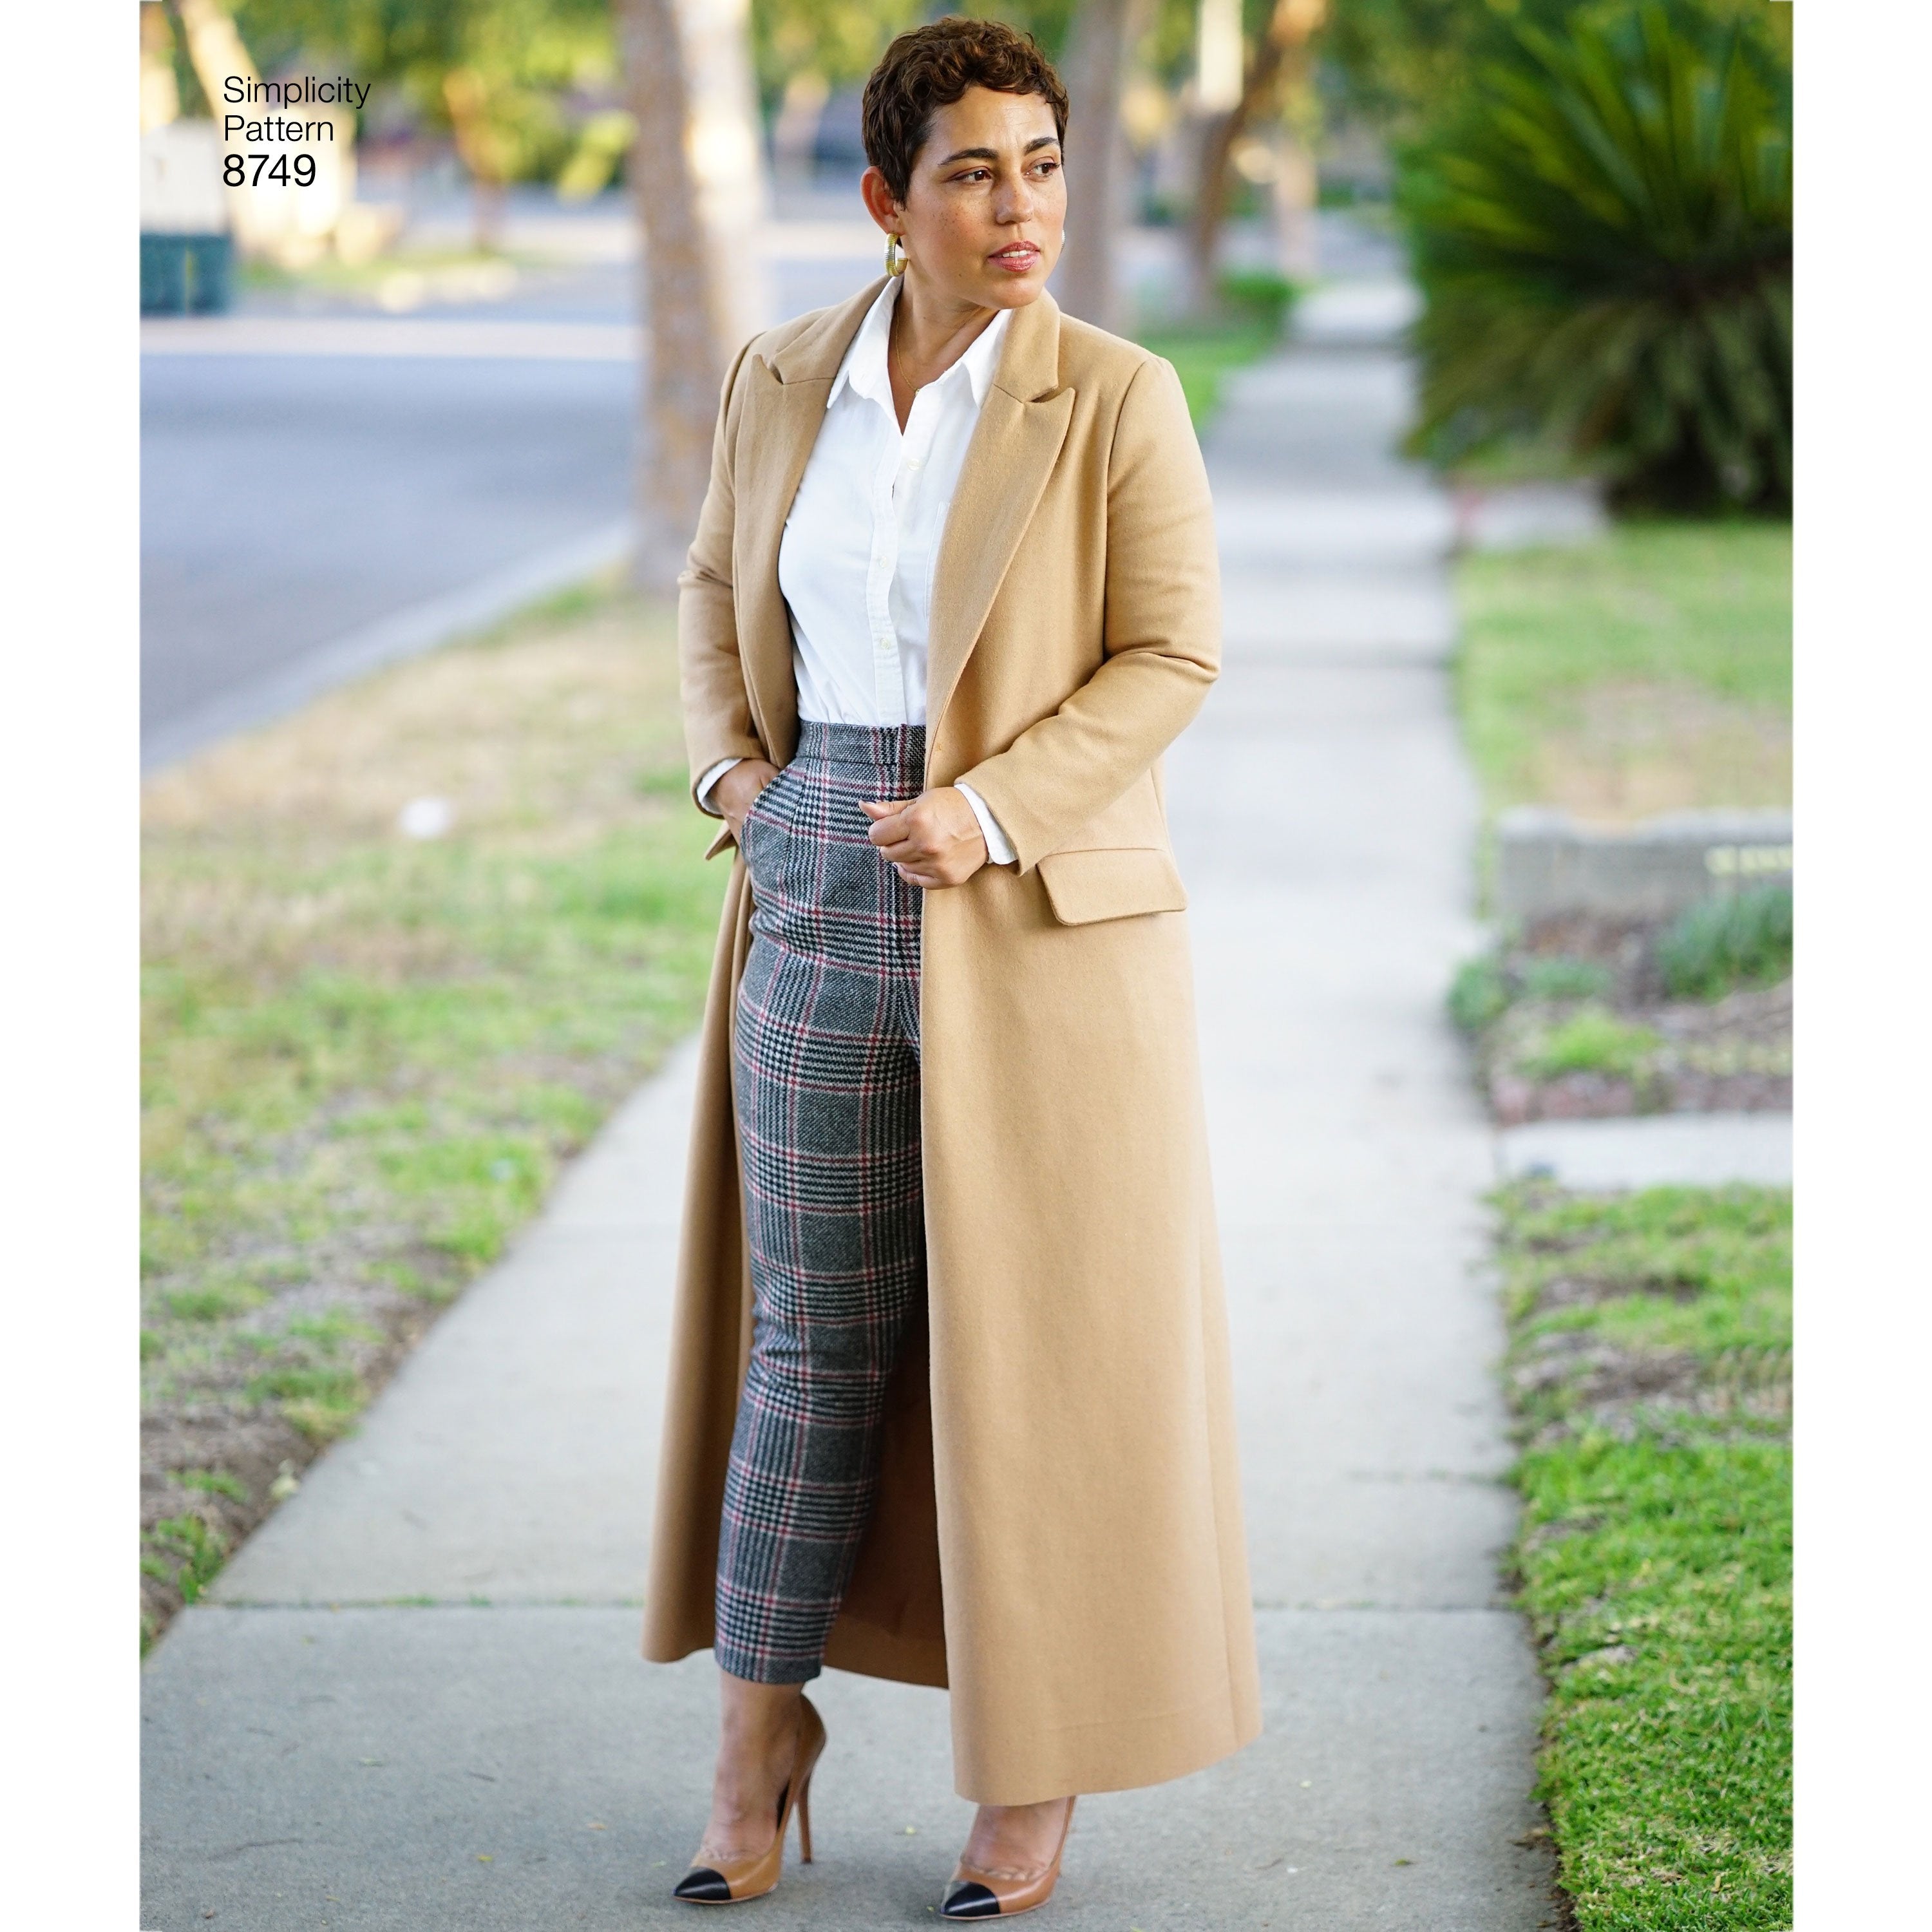 Simplicity Pattern 8749 Mimi G Style wool coat from Jaycotts Sewing Supplies